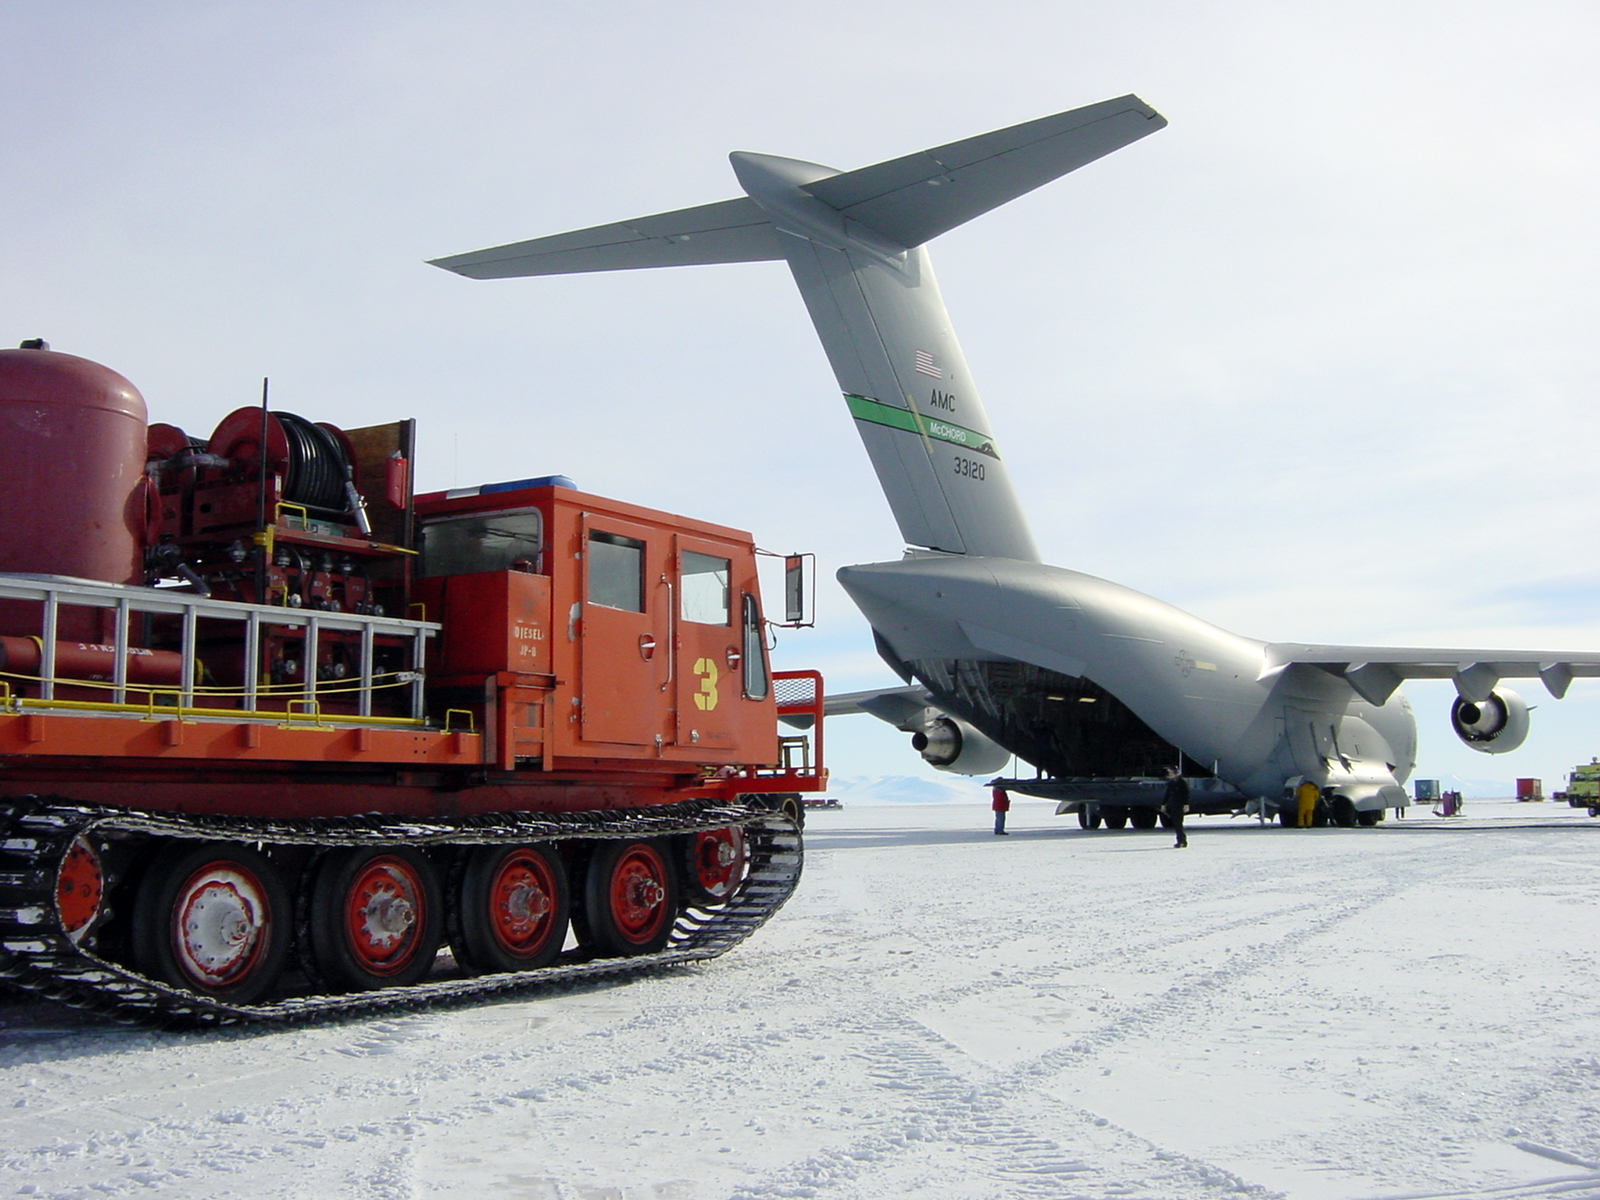 A truck parks near an airplane on ice.